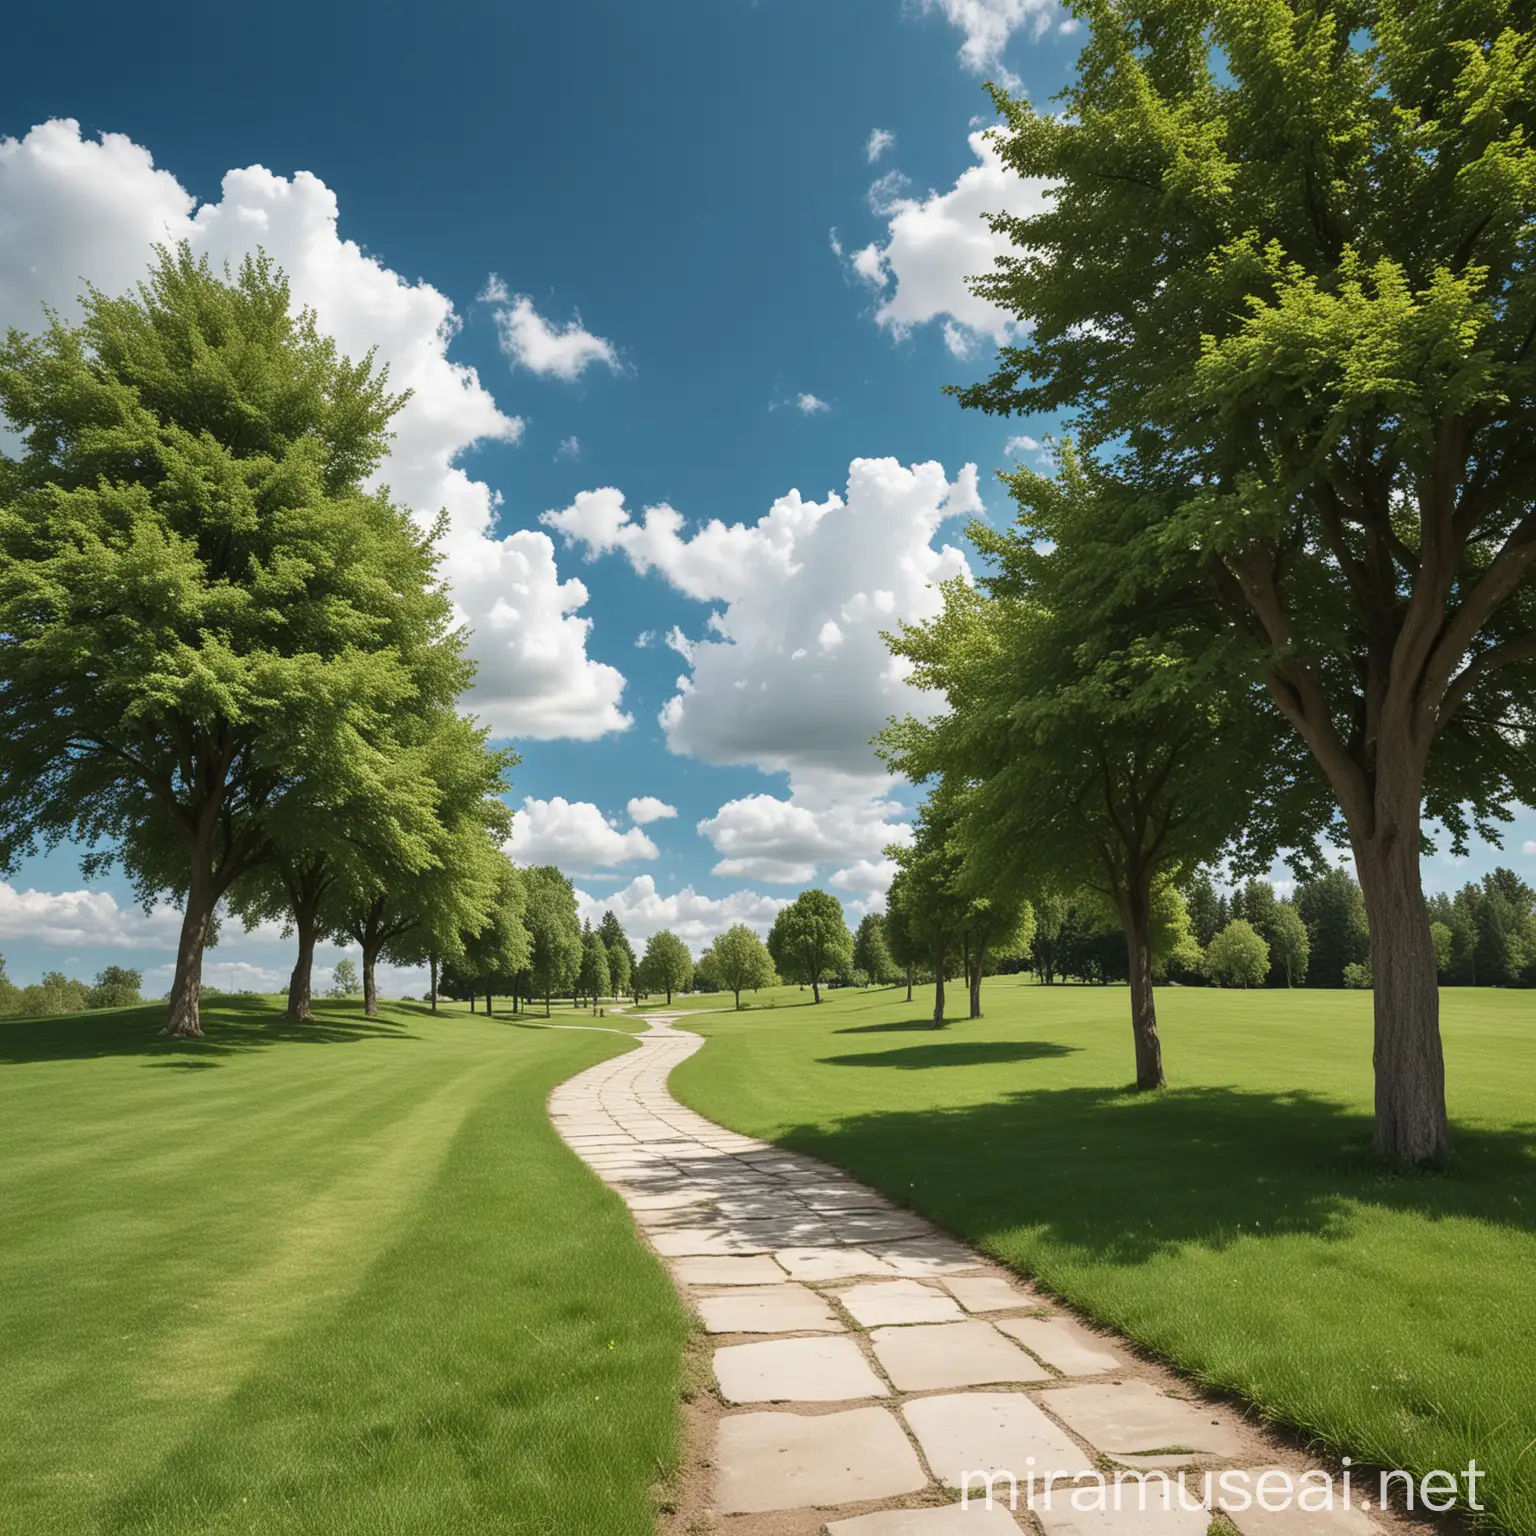 Scenic Park Landscape with Treelined Path and Blue Sky